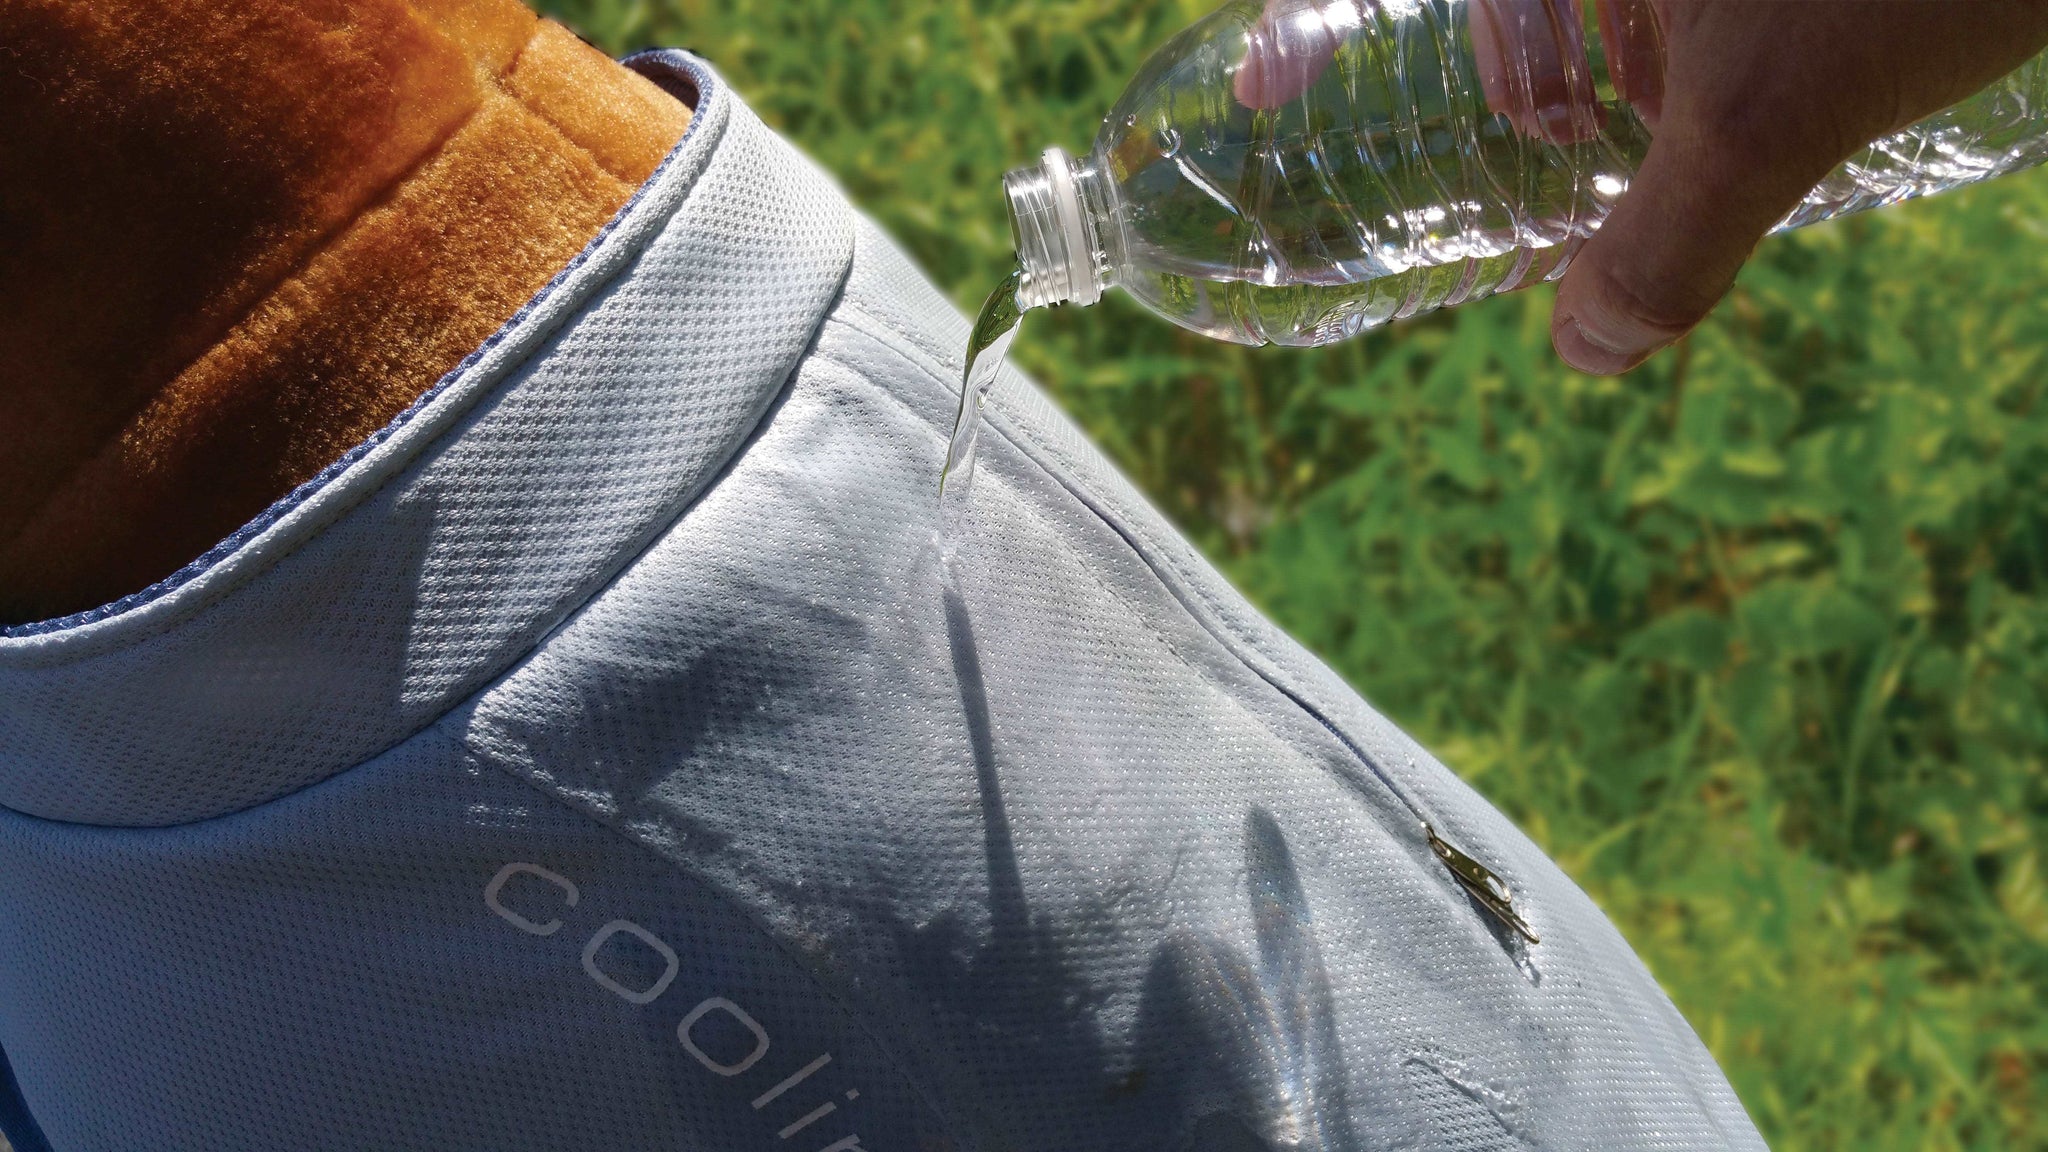 Applying water to the Kurgo dog cooling vest 